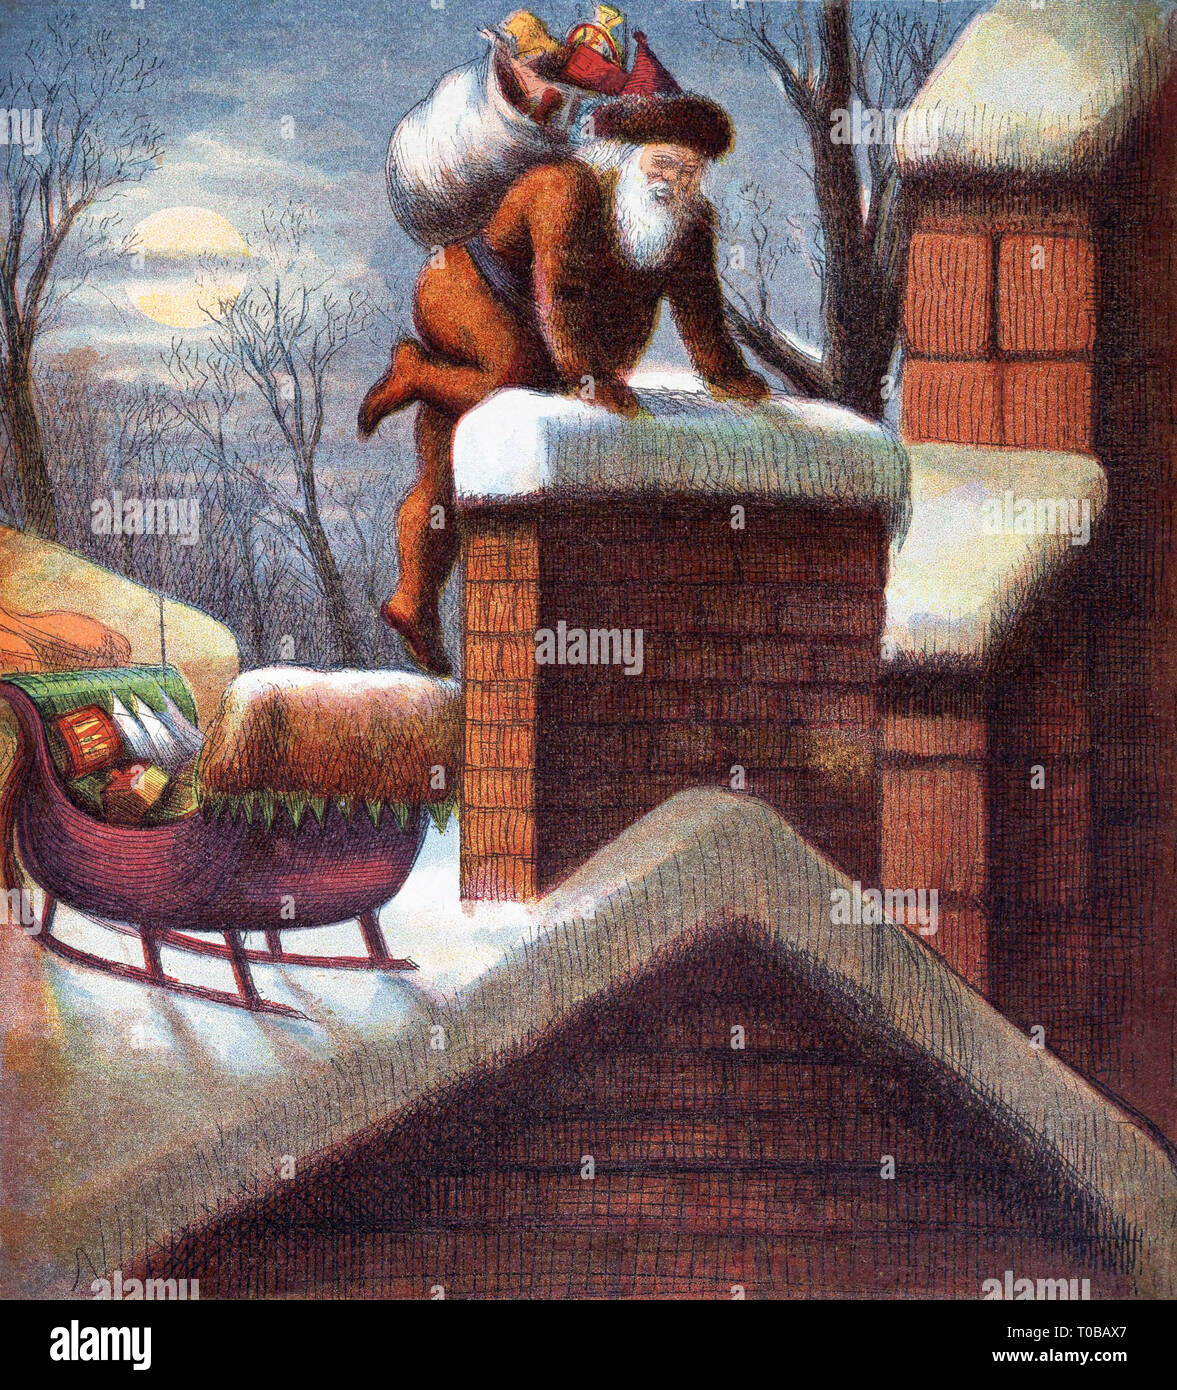 St. Nicholas Going Down the Chimney by Thomas Nast Stock Photo